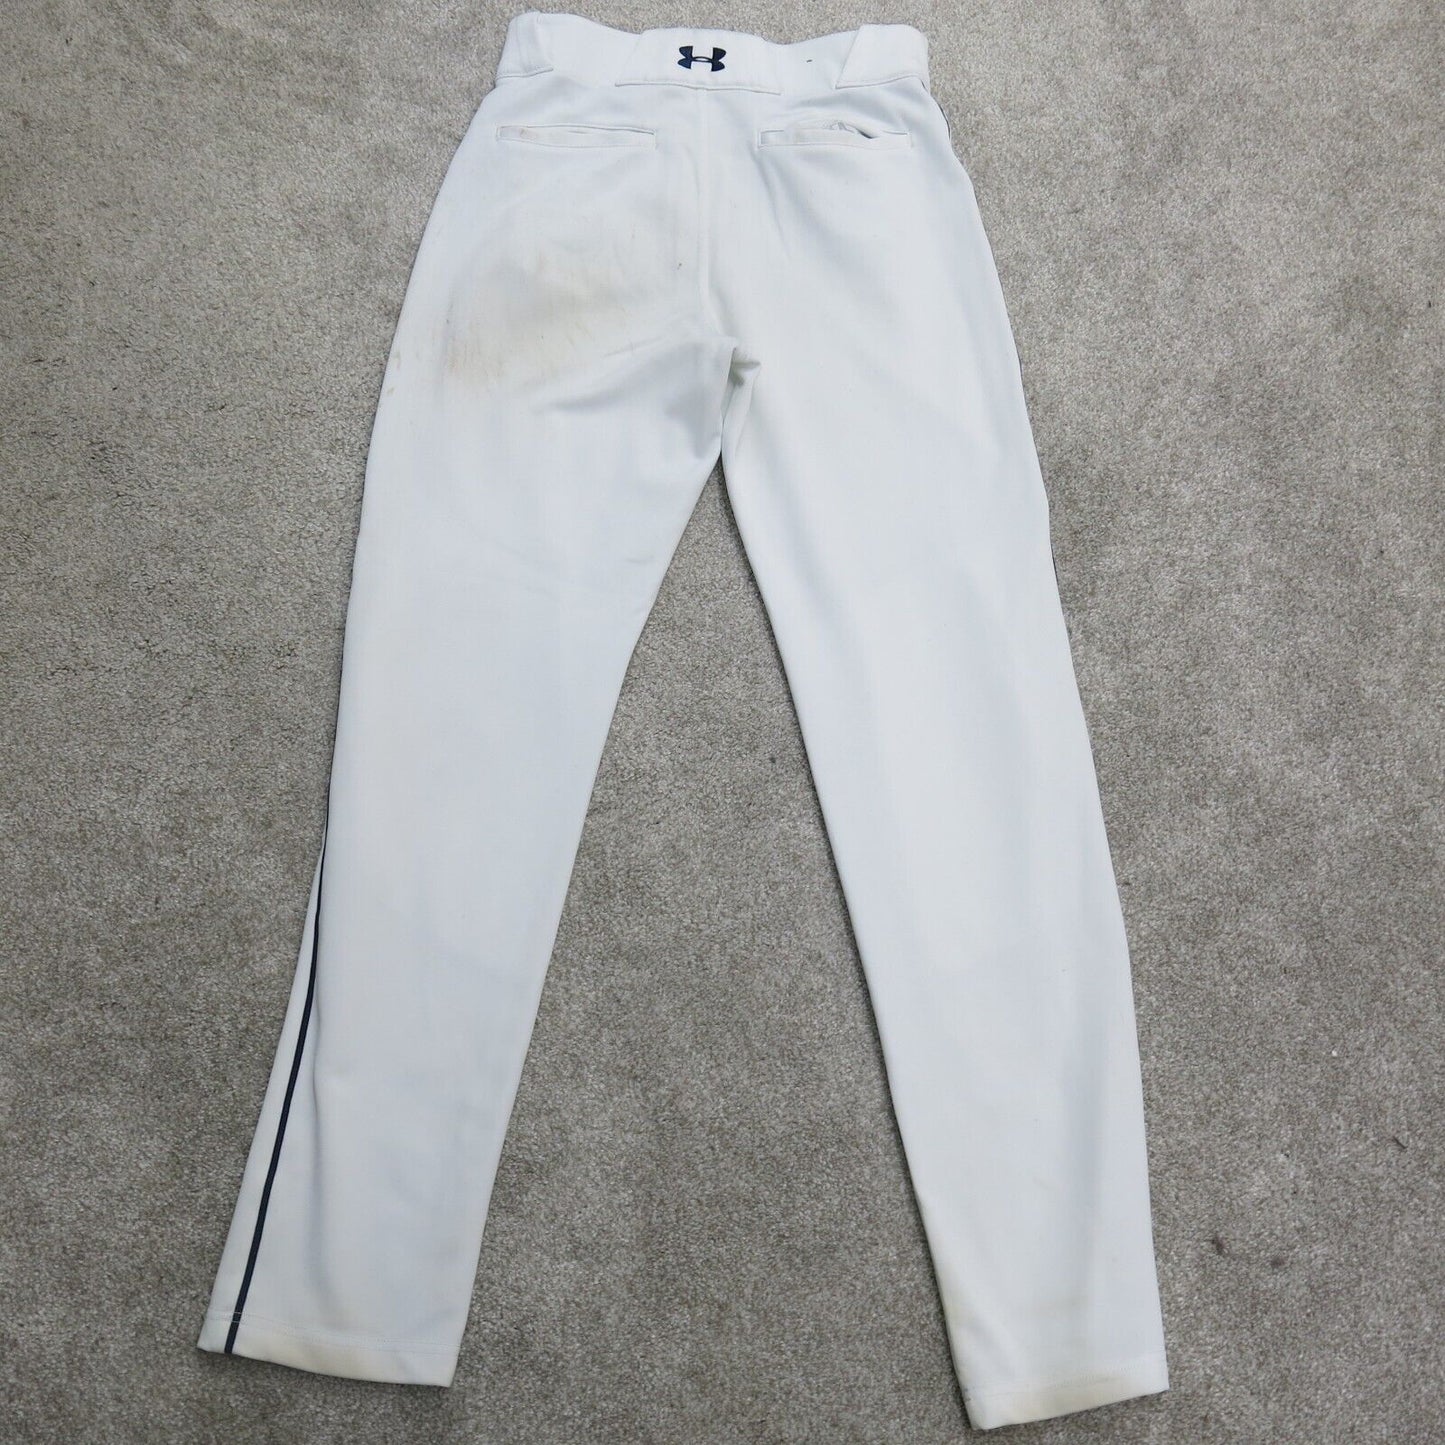 Under Armour Mens Sweatpants Skinny Striped Running Jogging White Size Small